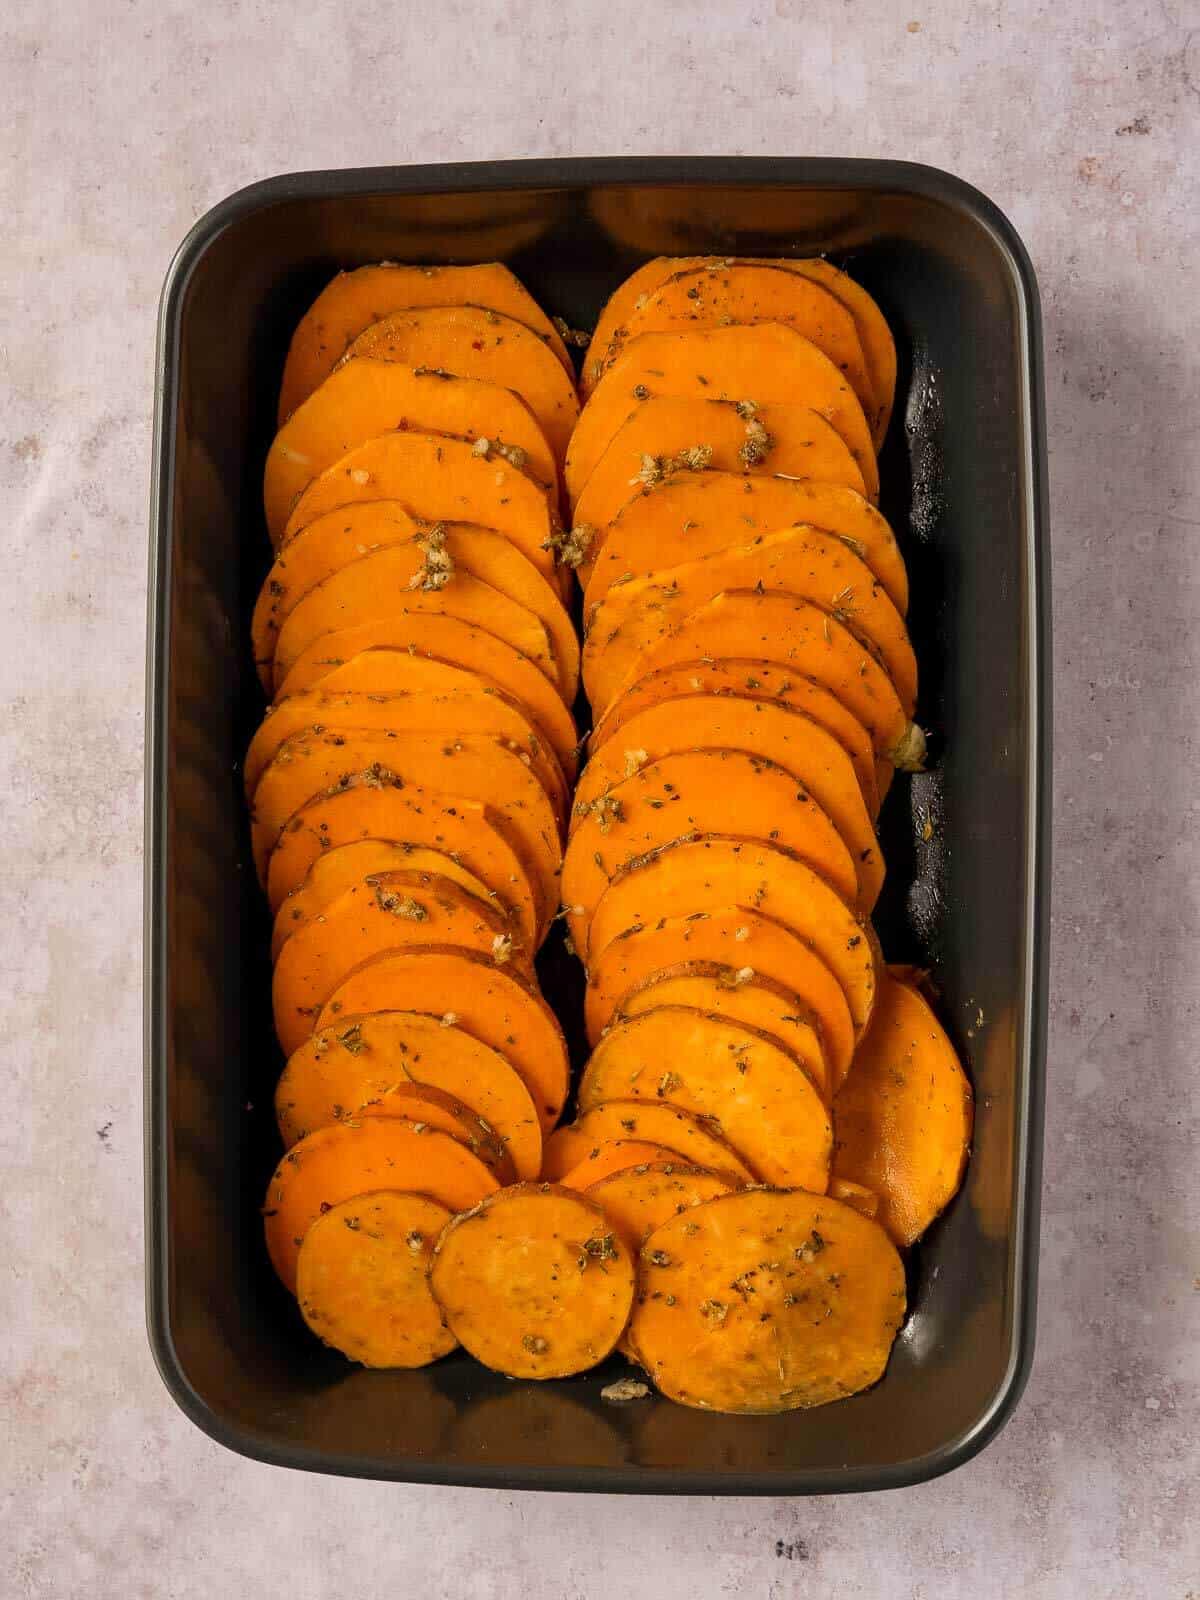 turn the sweet potato baking dish to the oven.